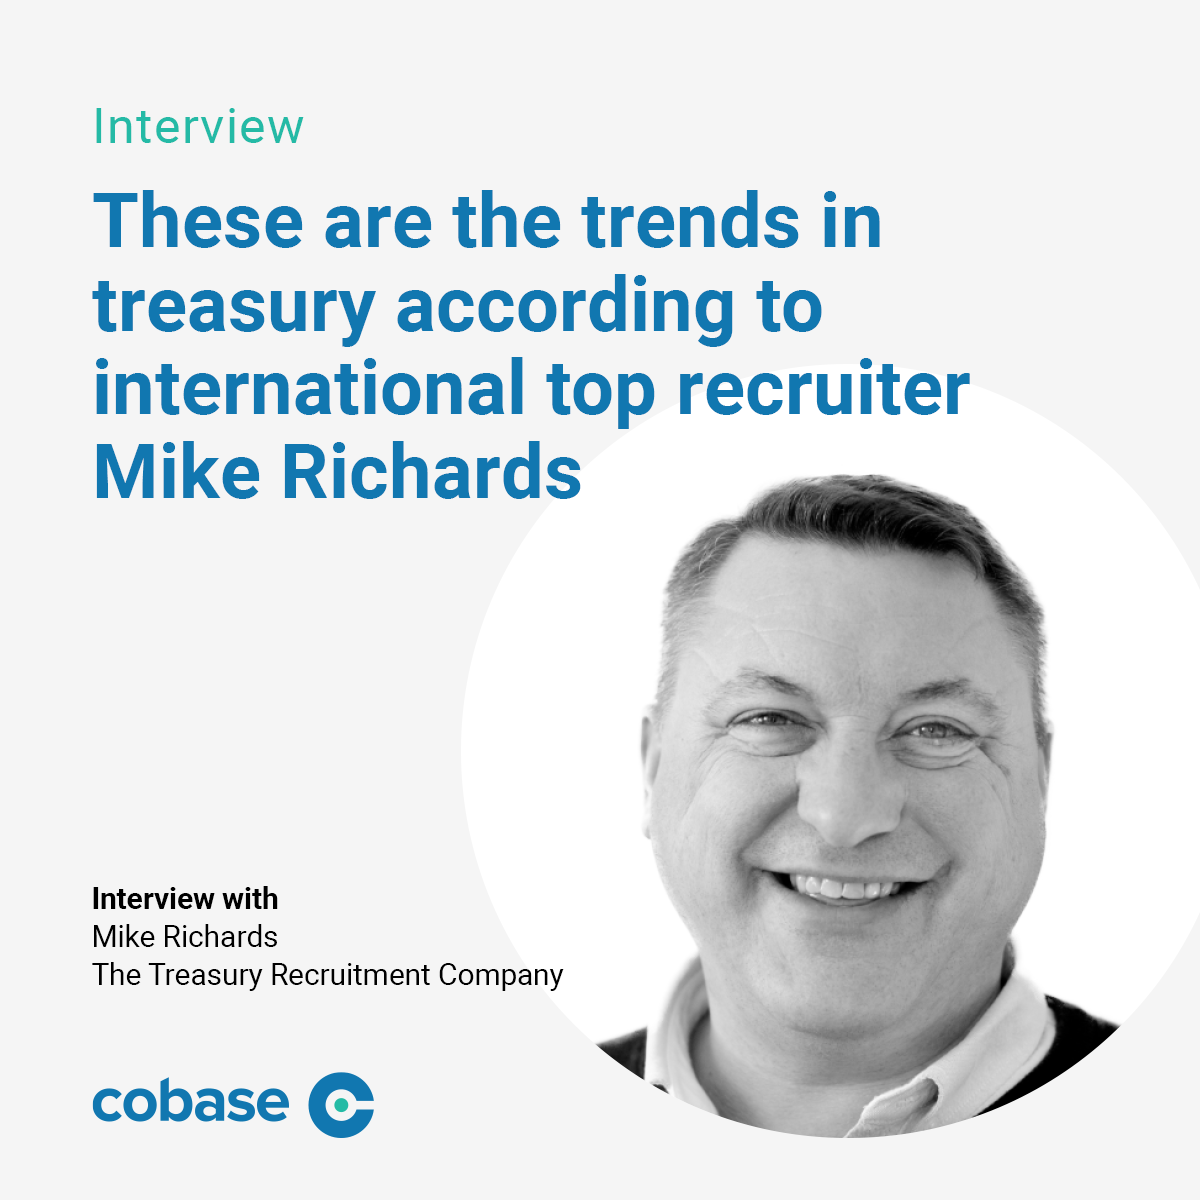 The trends in treasury according to top recruiter Mike Richards